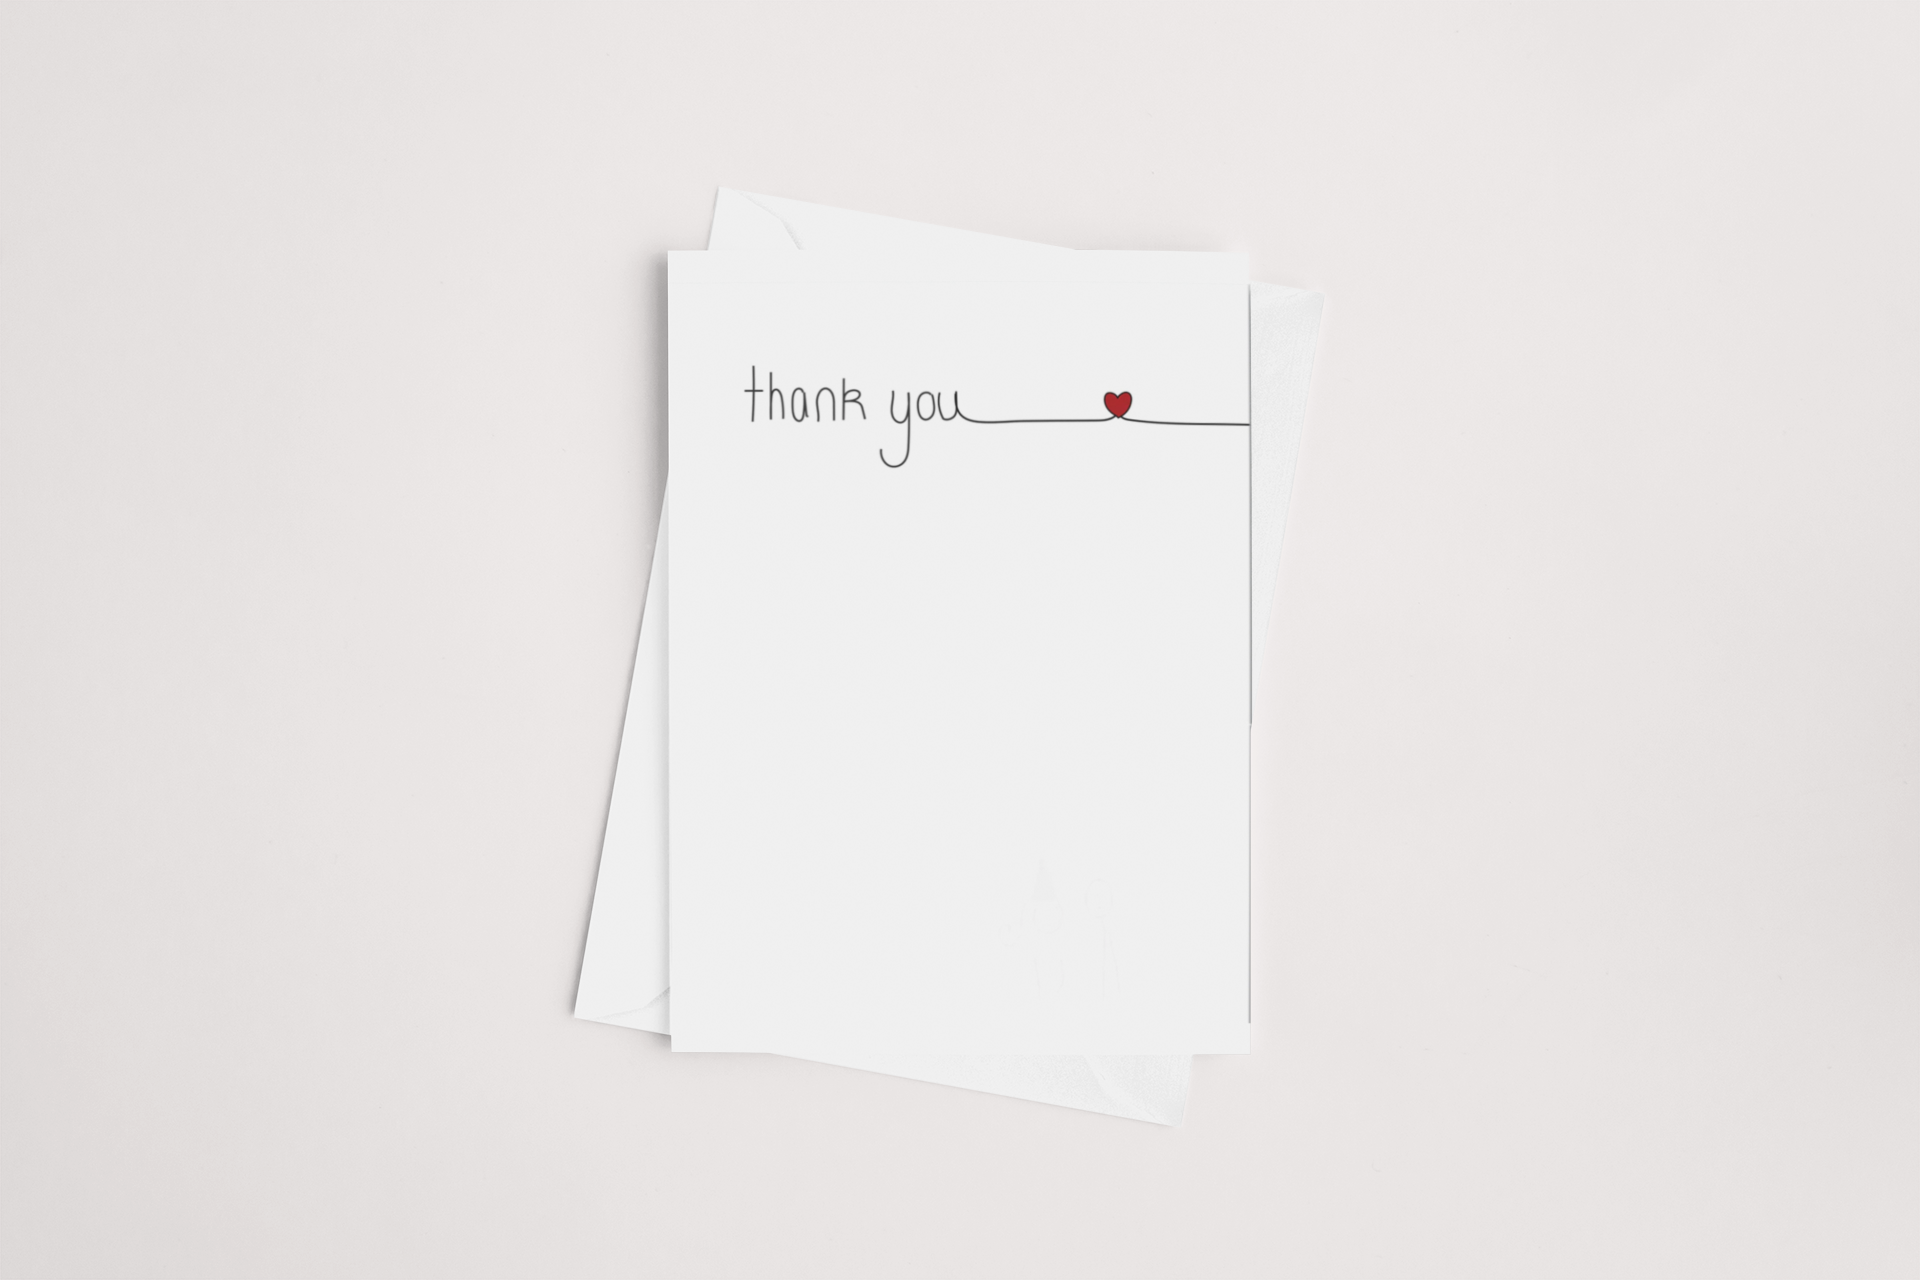 A simple yet elegant icandy "thank you" greeting card with a small red heart detail, placed on top of a white envelope against a clean background.